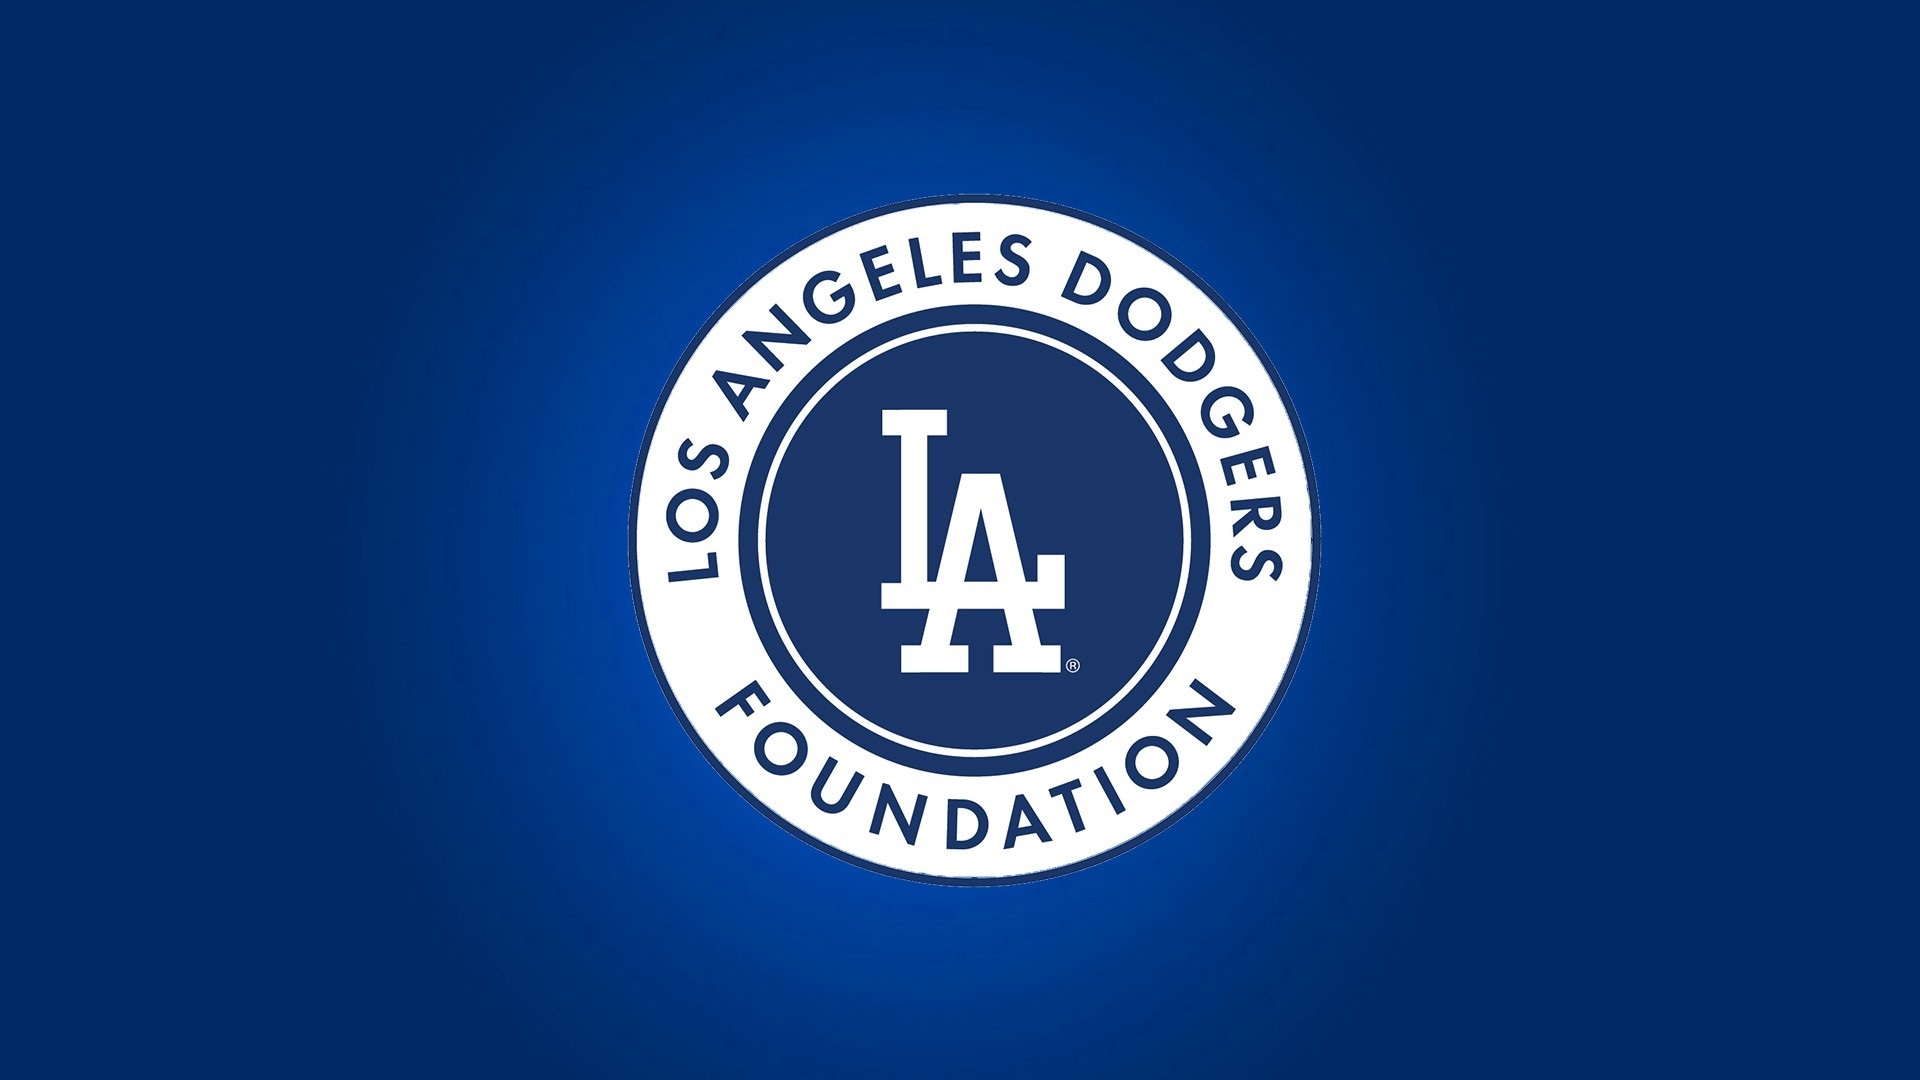 Wallpaper Desktop Los Angeles Dodgers MLB HD With high-resolution 1920X1080 pixel. You can use this wallpaper for Mac Desktop Wallpaper, Laptop Screensavers, Android Wallpapers, Tablet or iPhone Home Screen and another mobile phone device